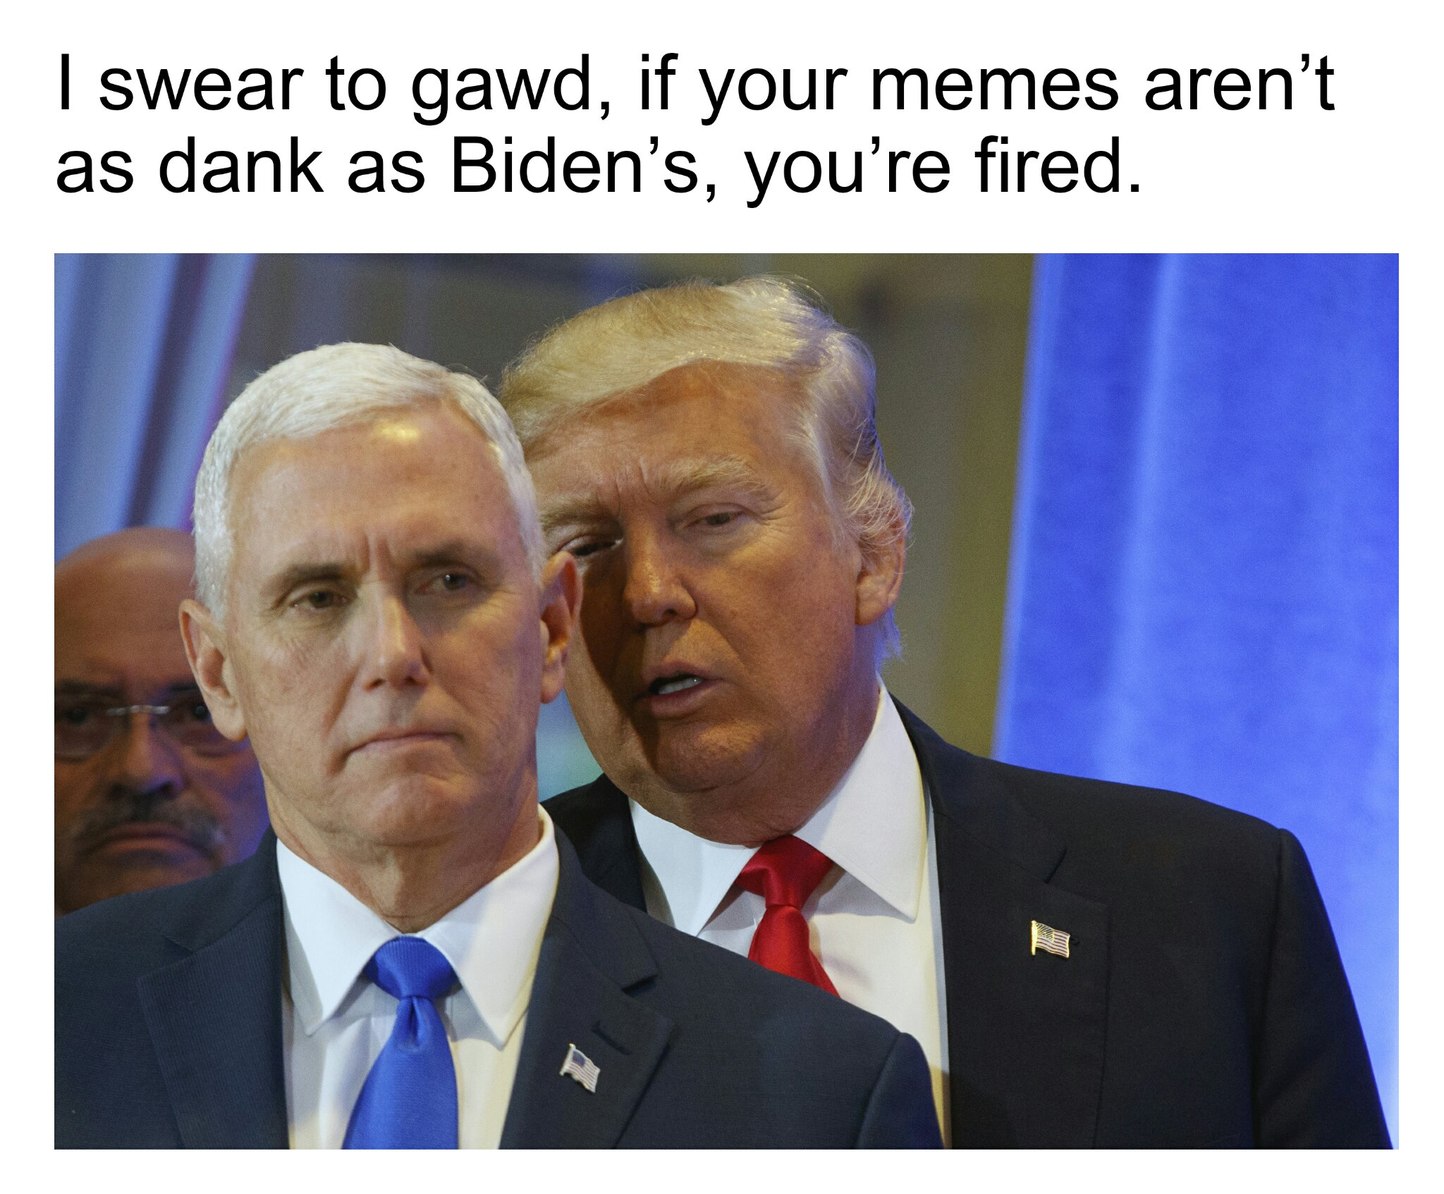 I wish Donald Trump would get fired - meme